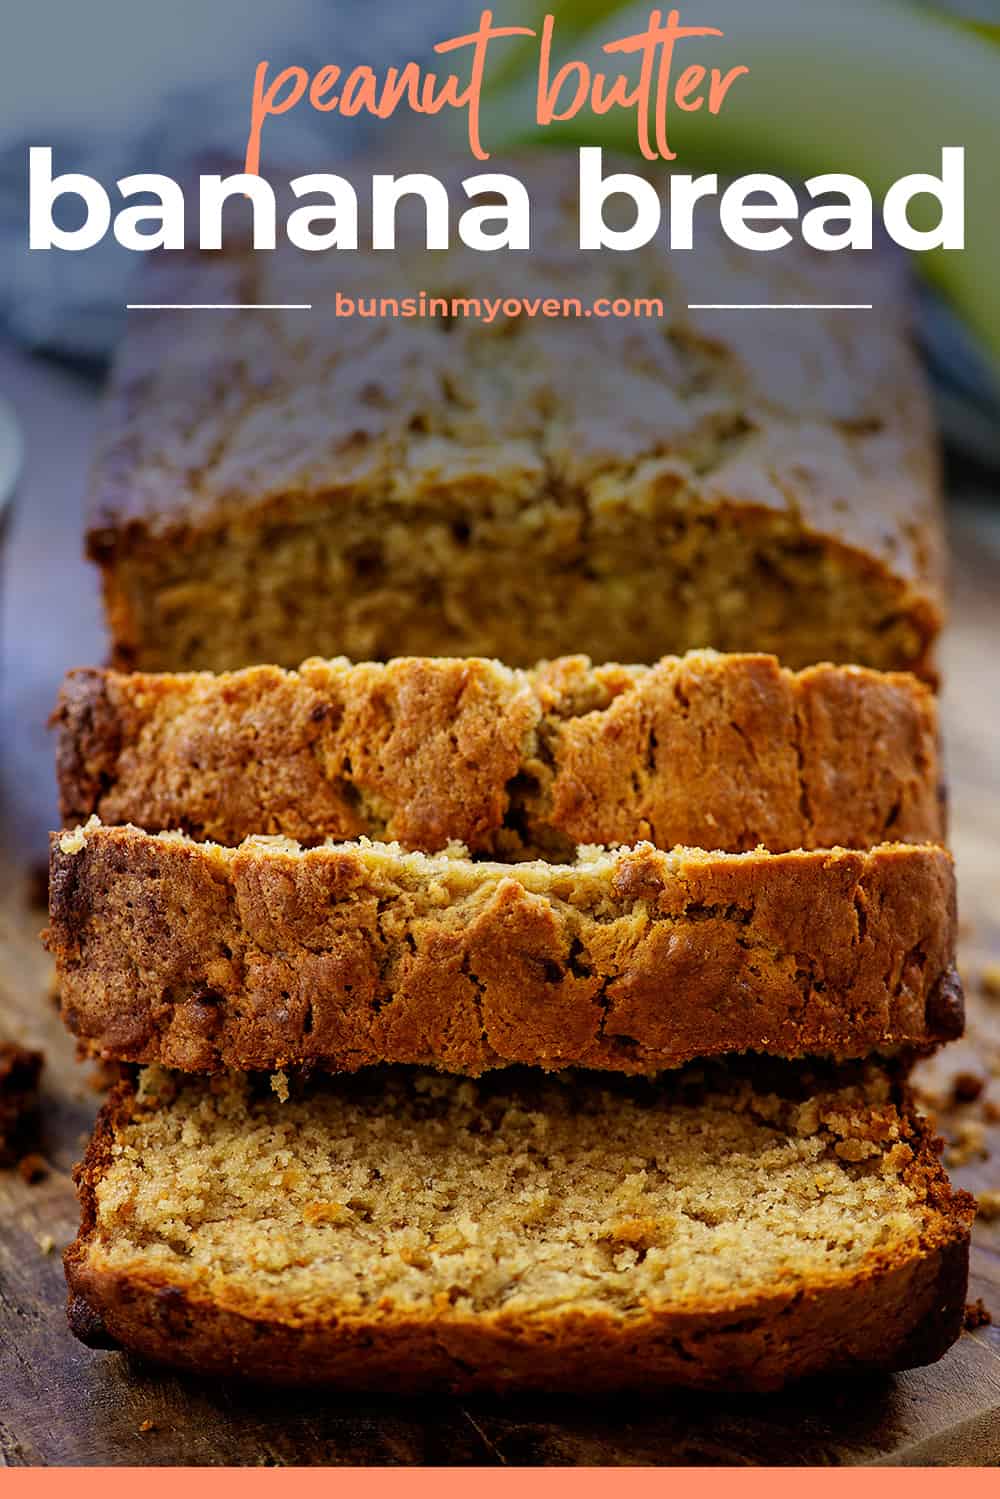 Sliced banana bread with text for Pinterest.